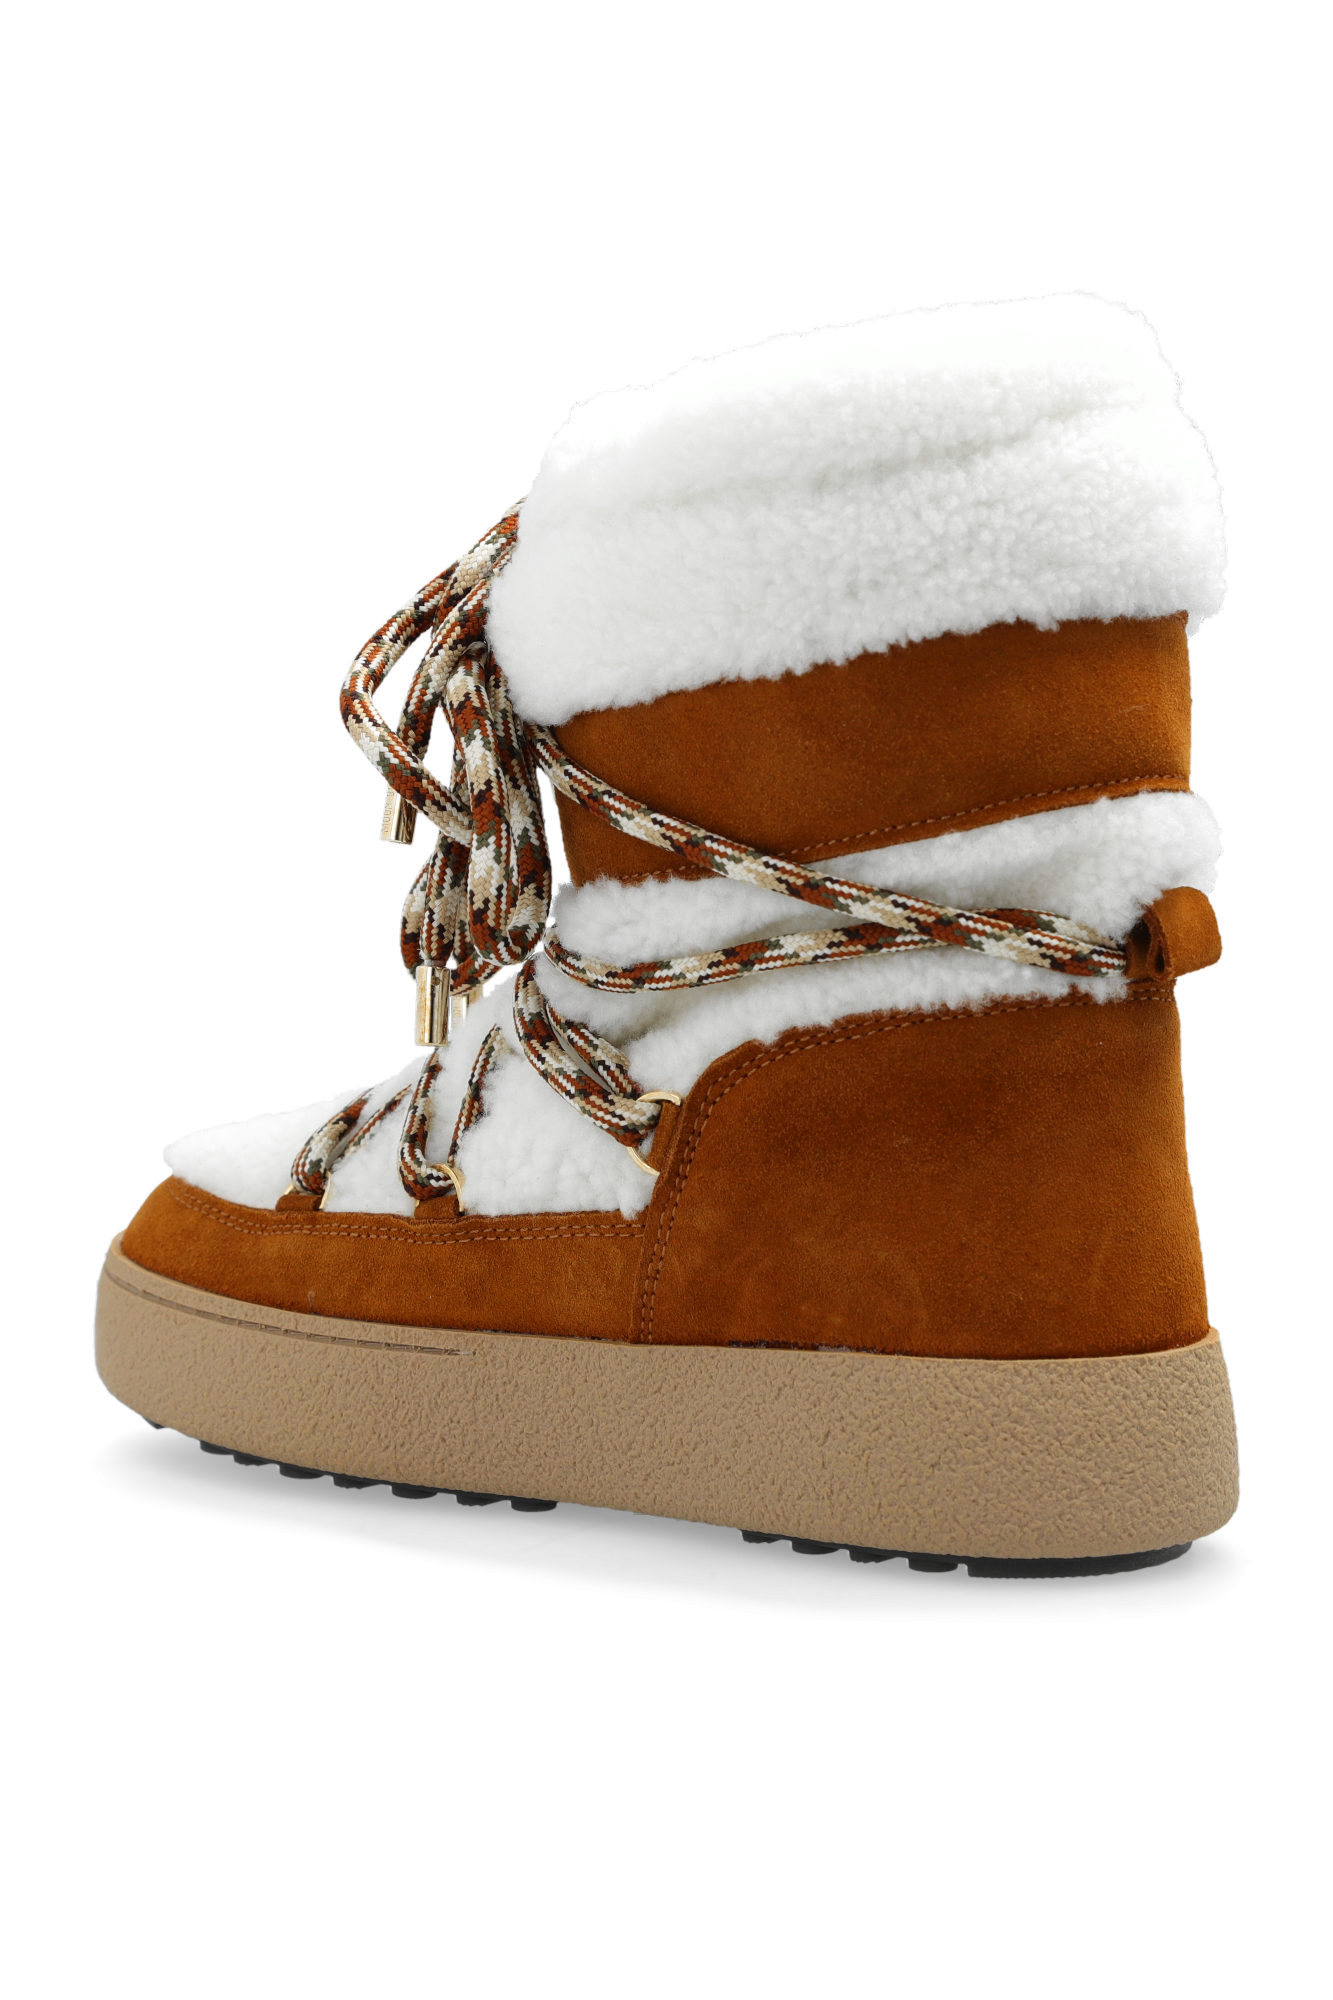 Moon Boot ‘Ltrack Shearling’ snow boots